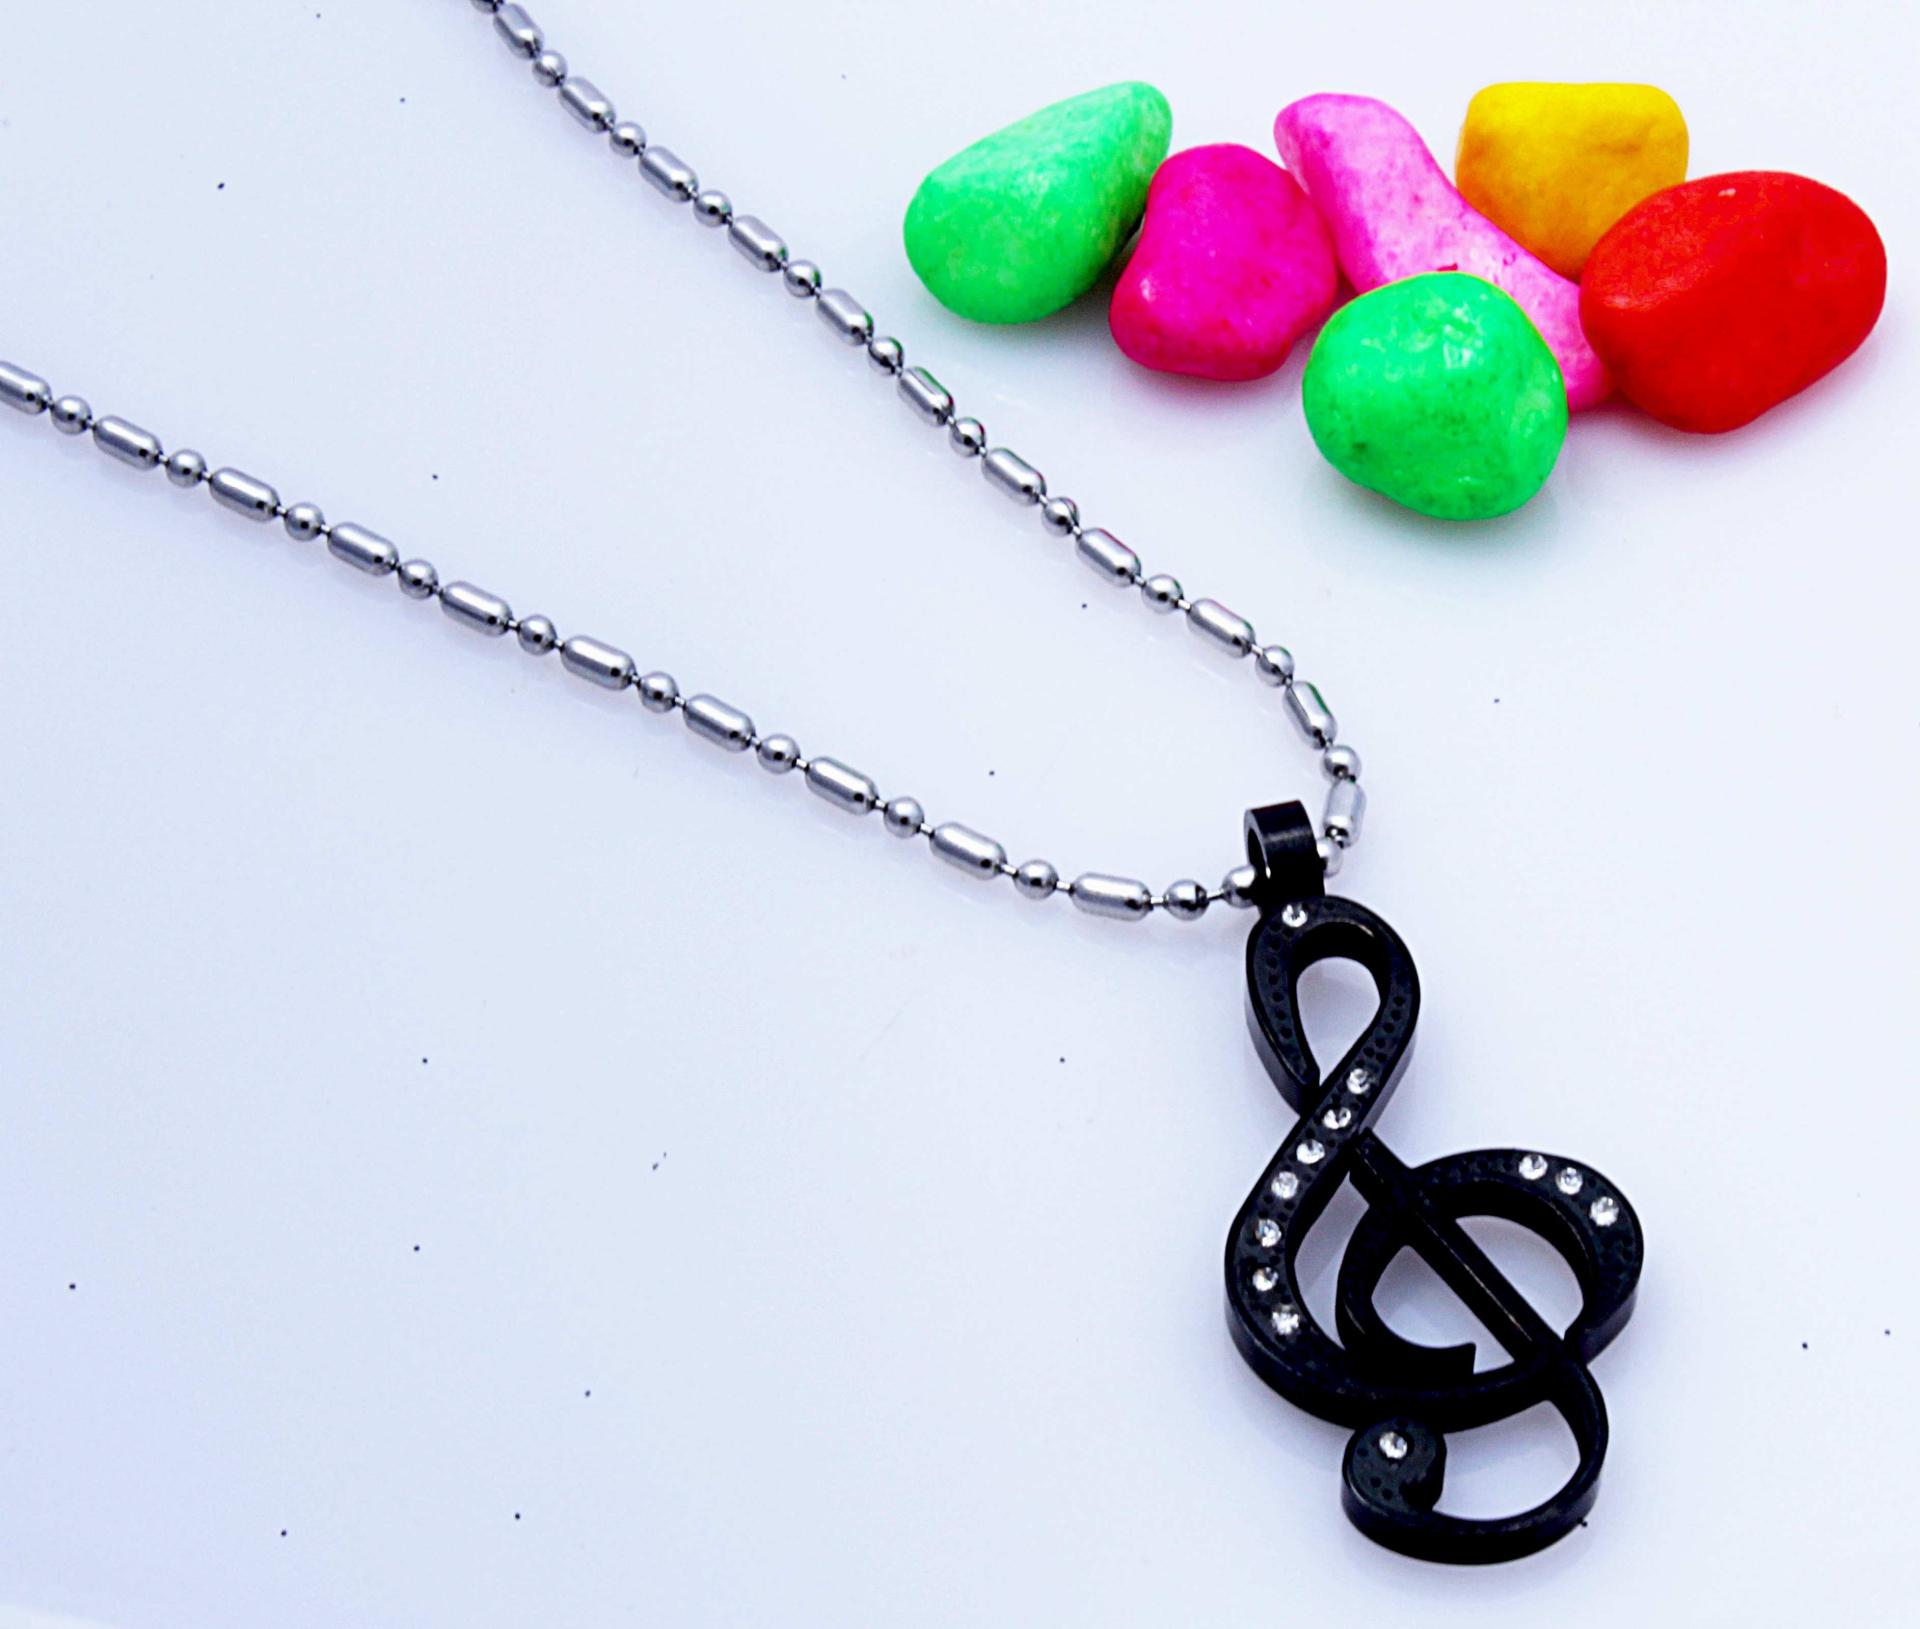 Treble Clef Necklace in Stainless Steel with CZ Stones